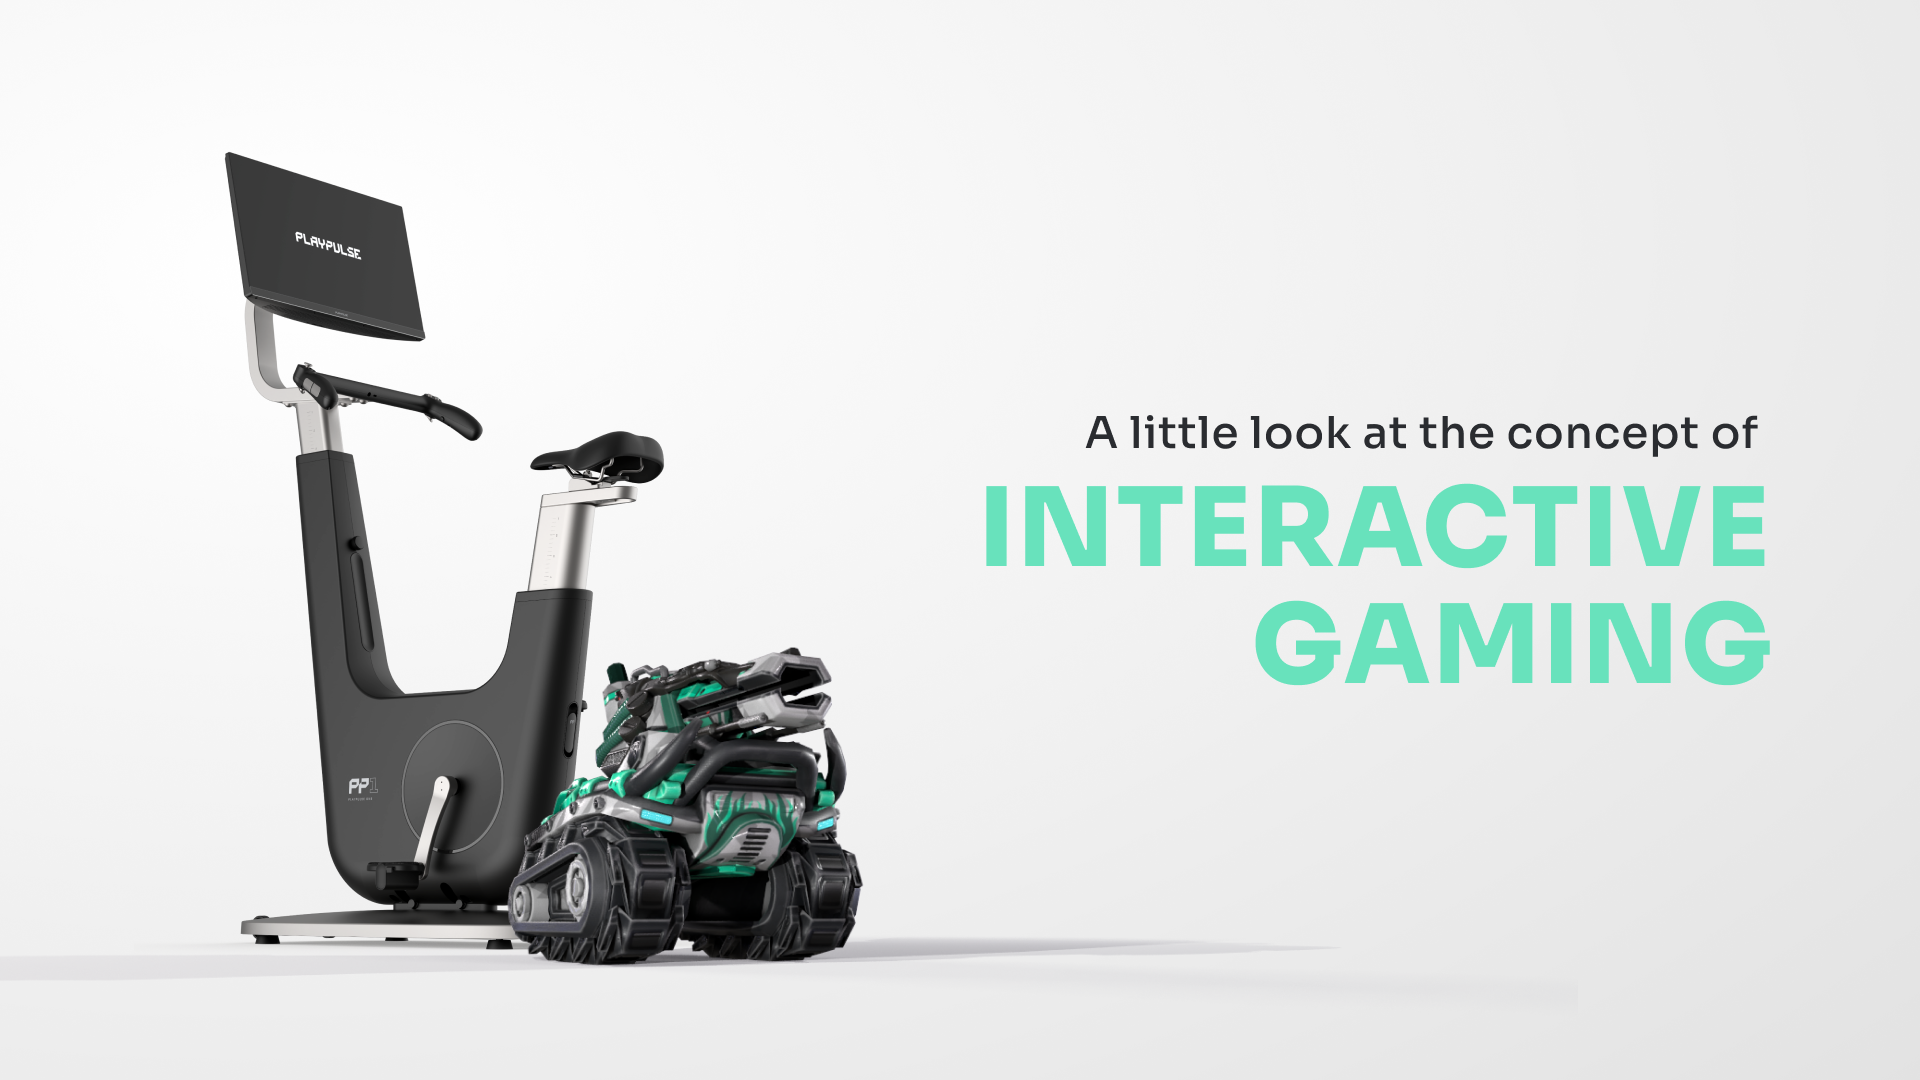 The exercise bike built on an interactive gaming experience